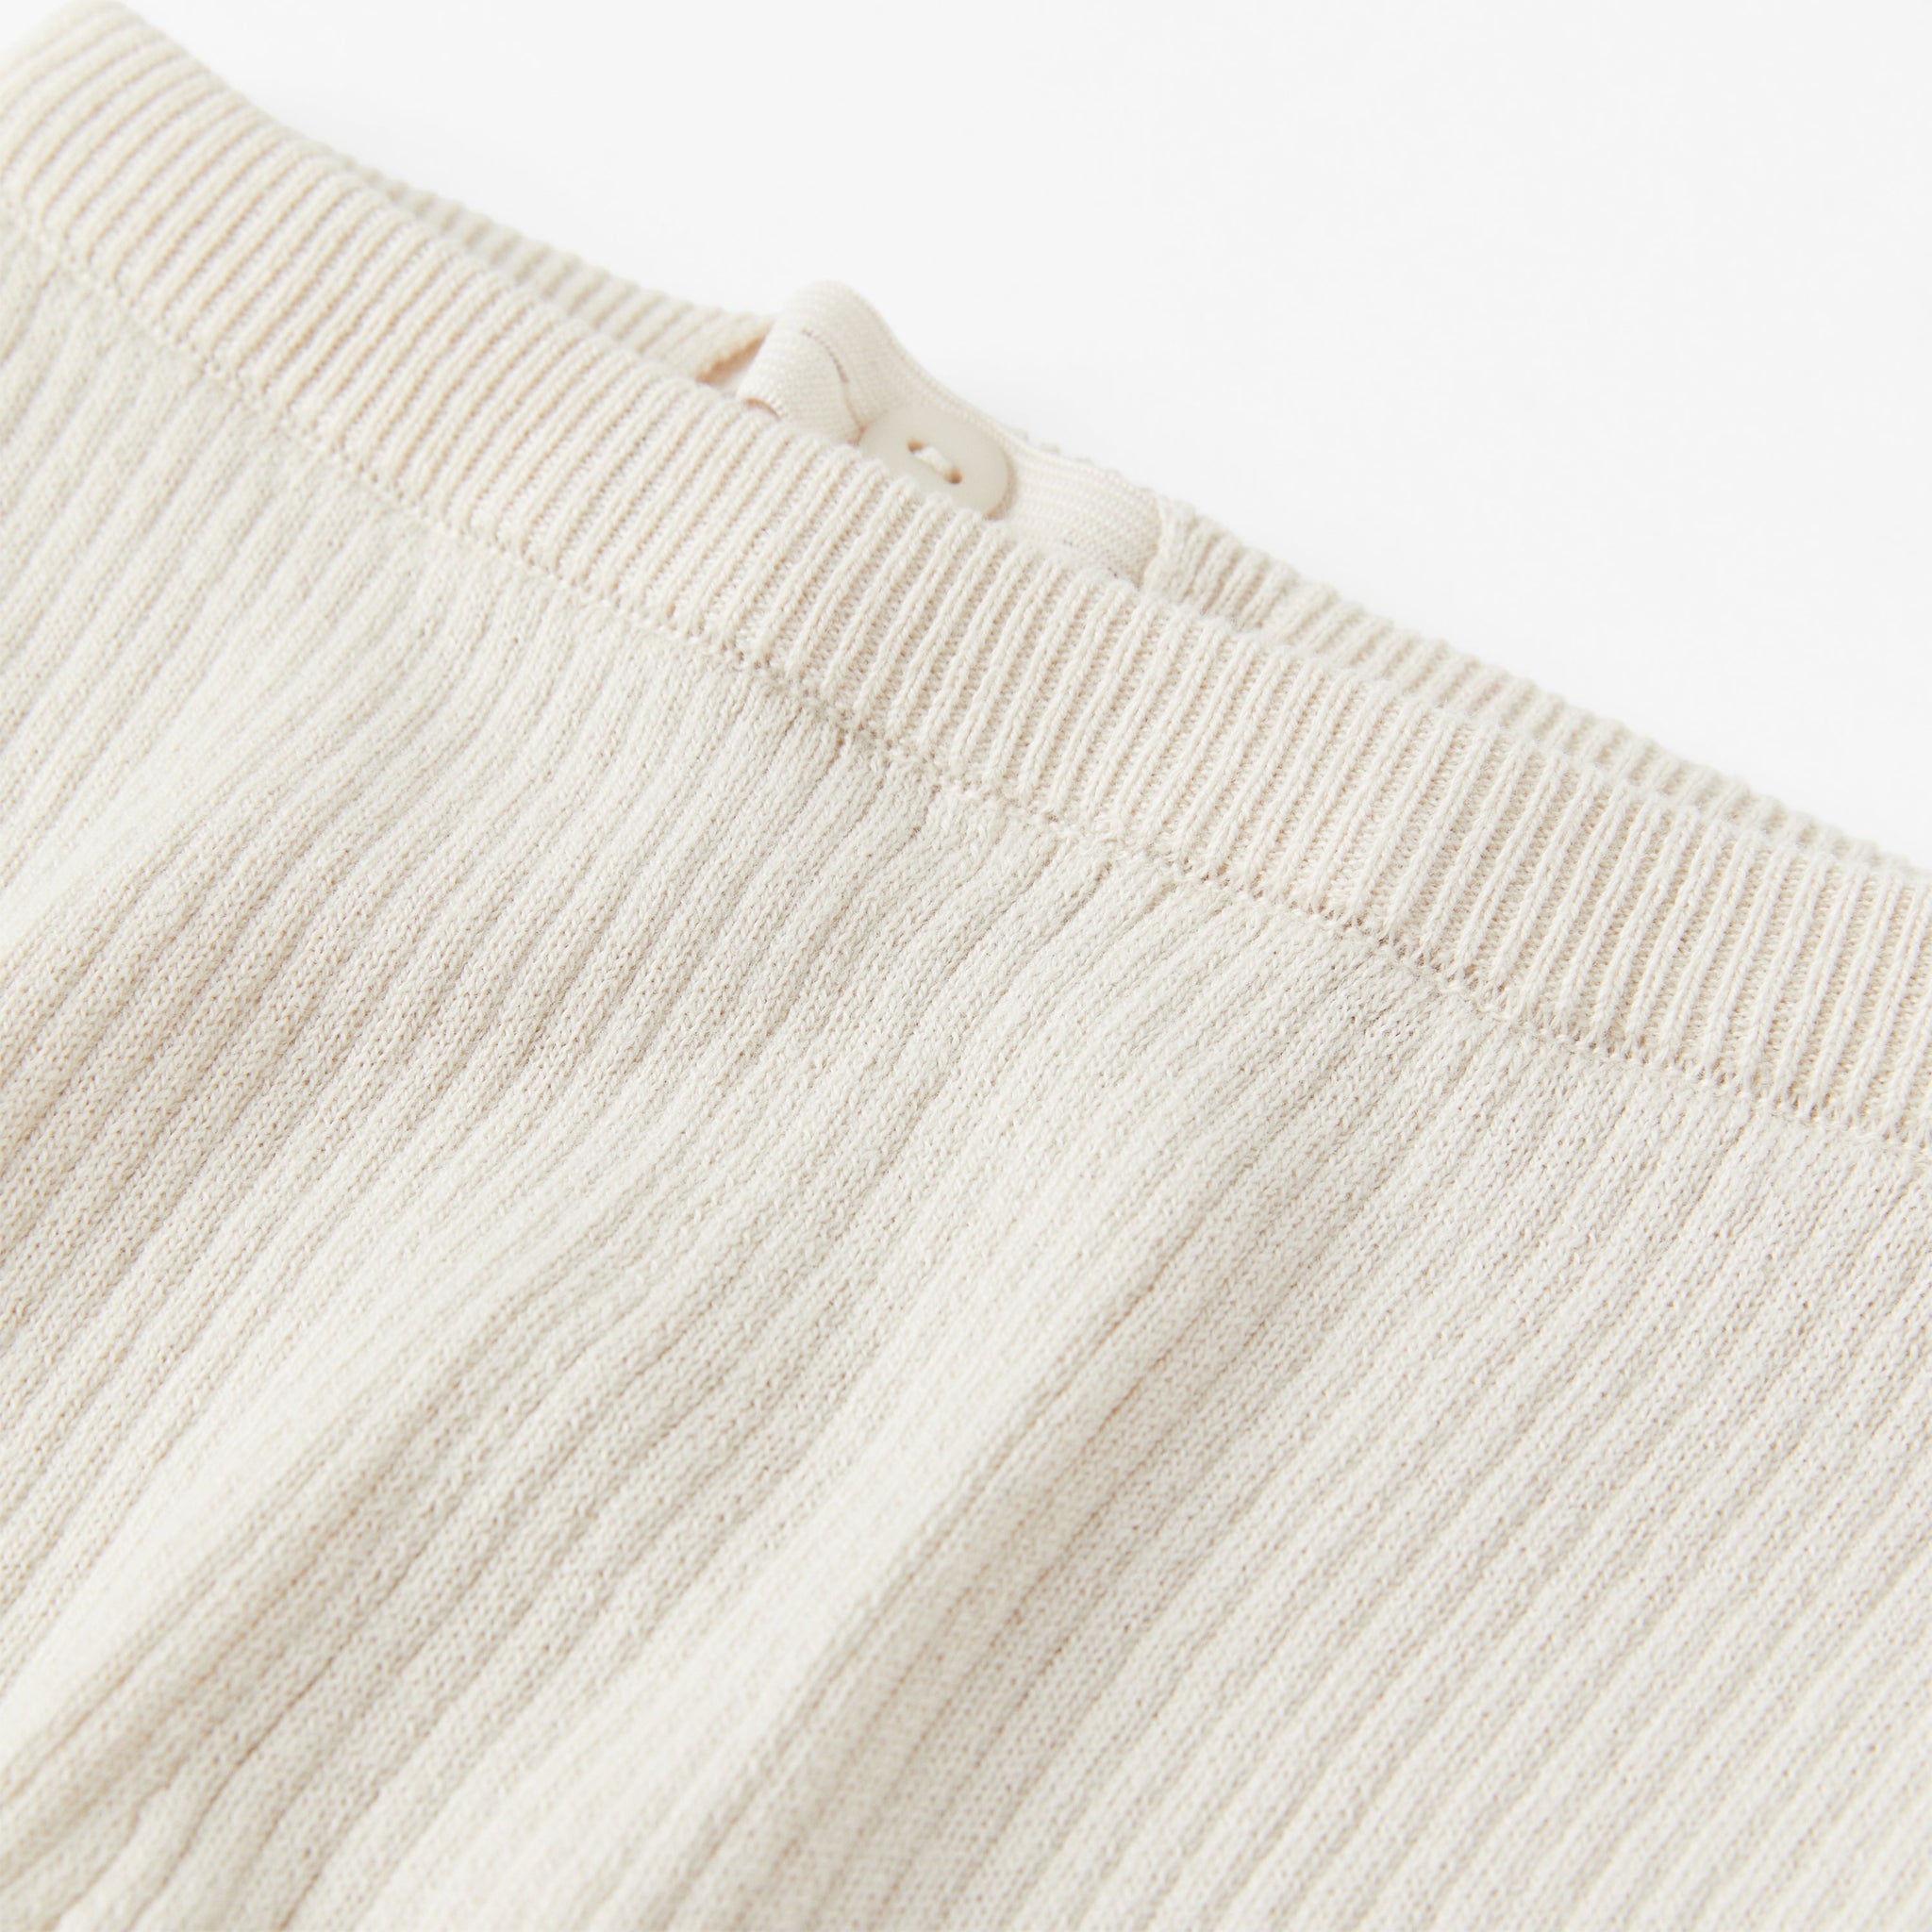 Ribbed White Knitted Baby Trousers from the Polarn O. Pyret babywear collection. Nordic baby clothes made from sustainable sources.